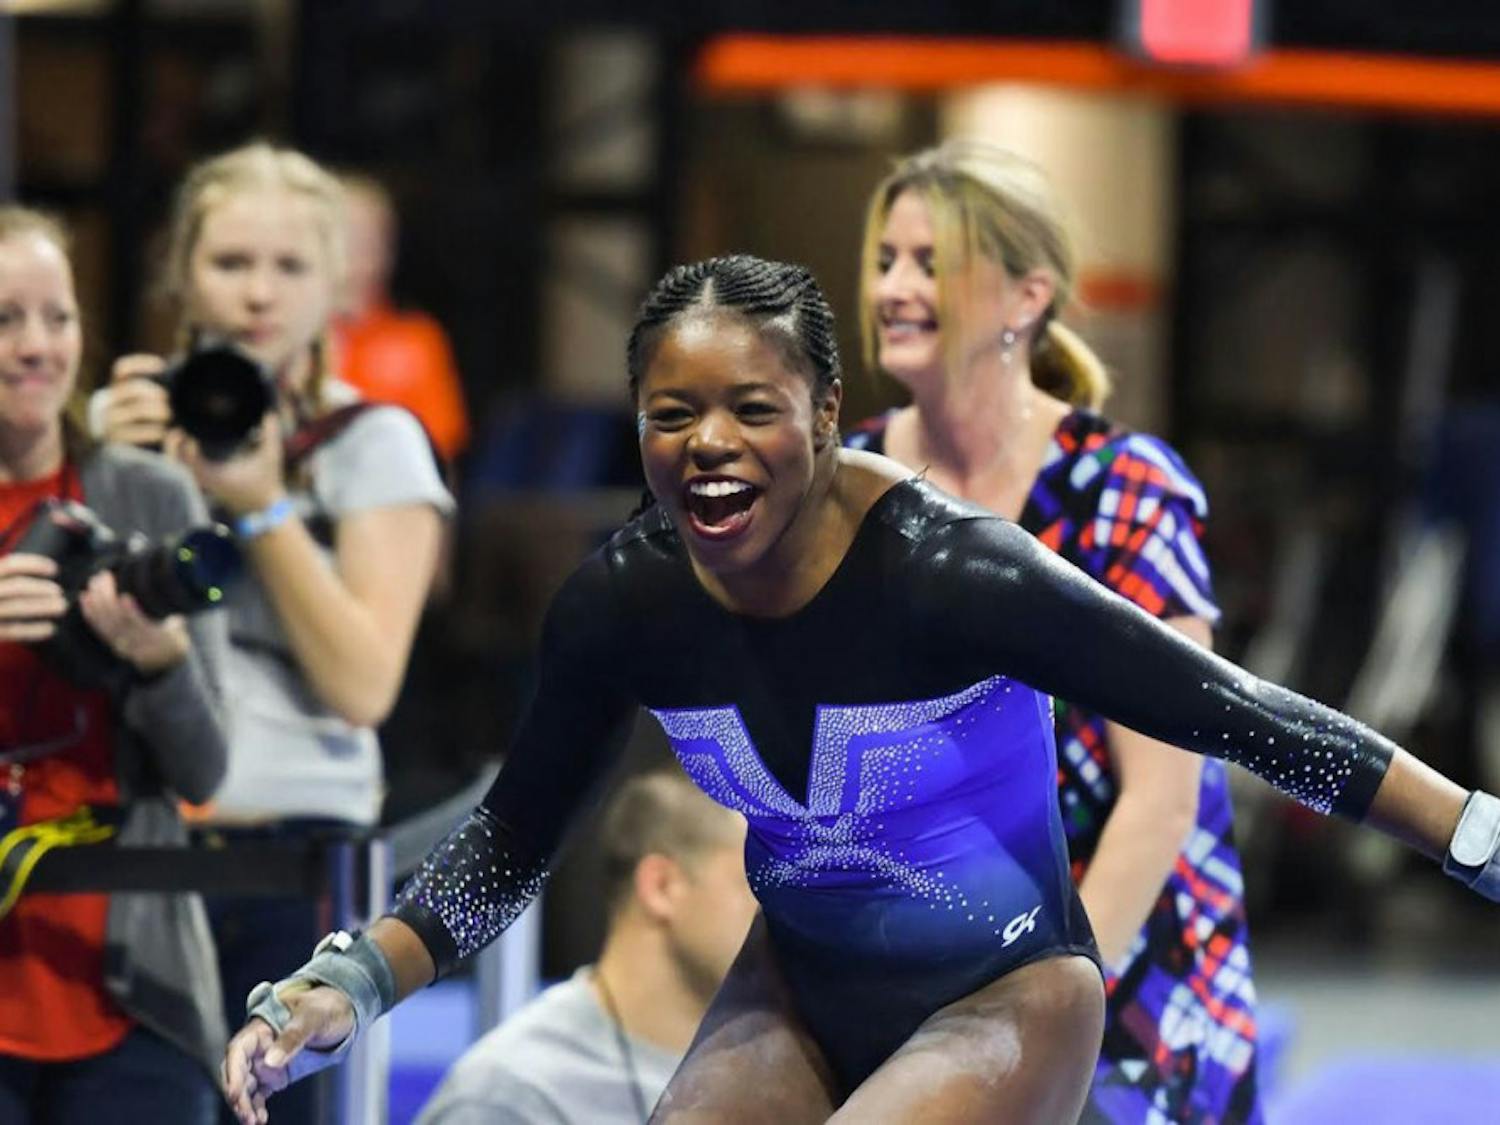 Alicia Boren and the Gators begin their SEC schedule tonight against LSU at the O'Connell Center after an opening-night win against West Virginia. “I’m so excited definitely to get back in front of our home crowd,” Boren said. “They bring a lot of energy.”